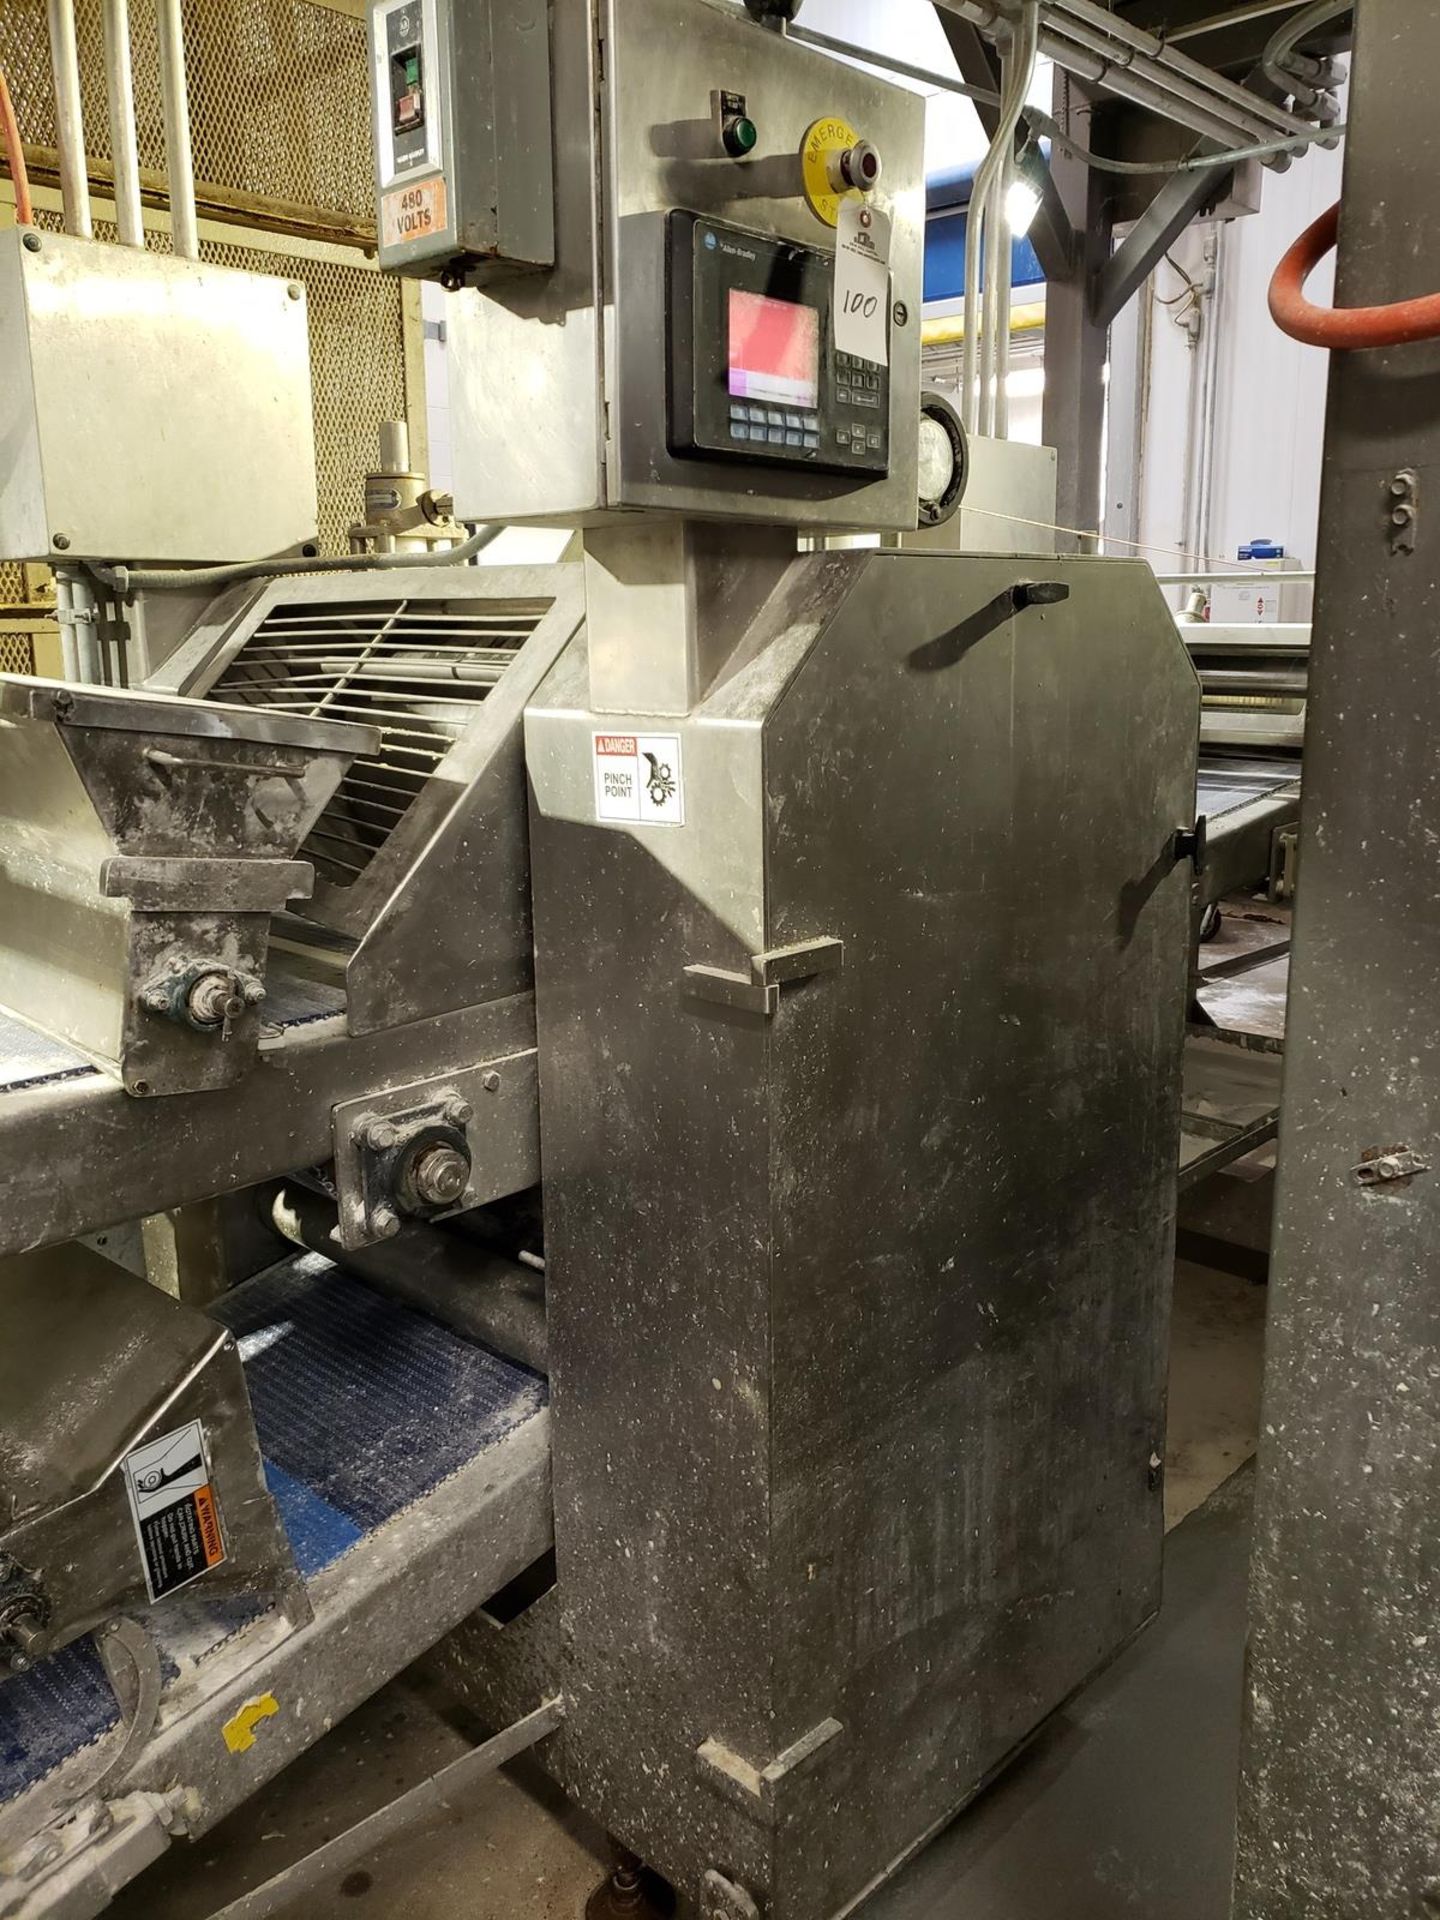 Moline 24" Roll-In/Laminateng Line, W/ (2) Sheeters, Sifters & Reciprocating Dough Depositor - Image 5 of 10